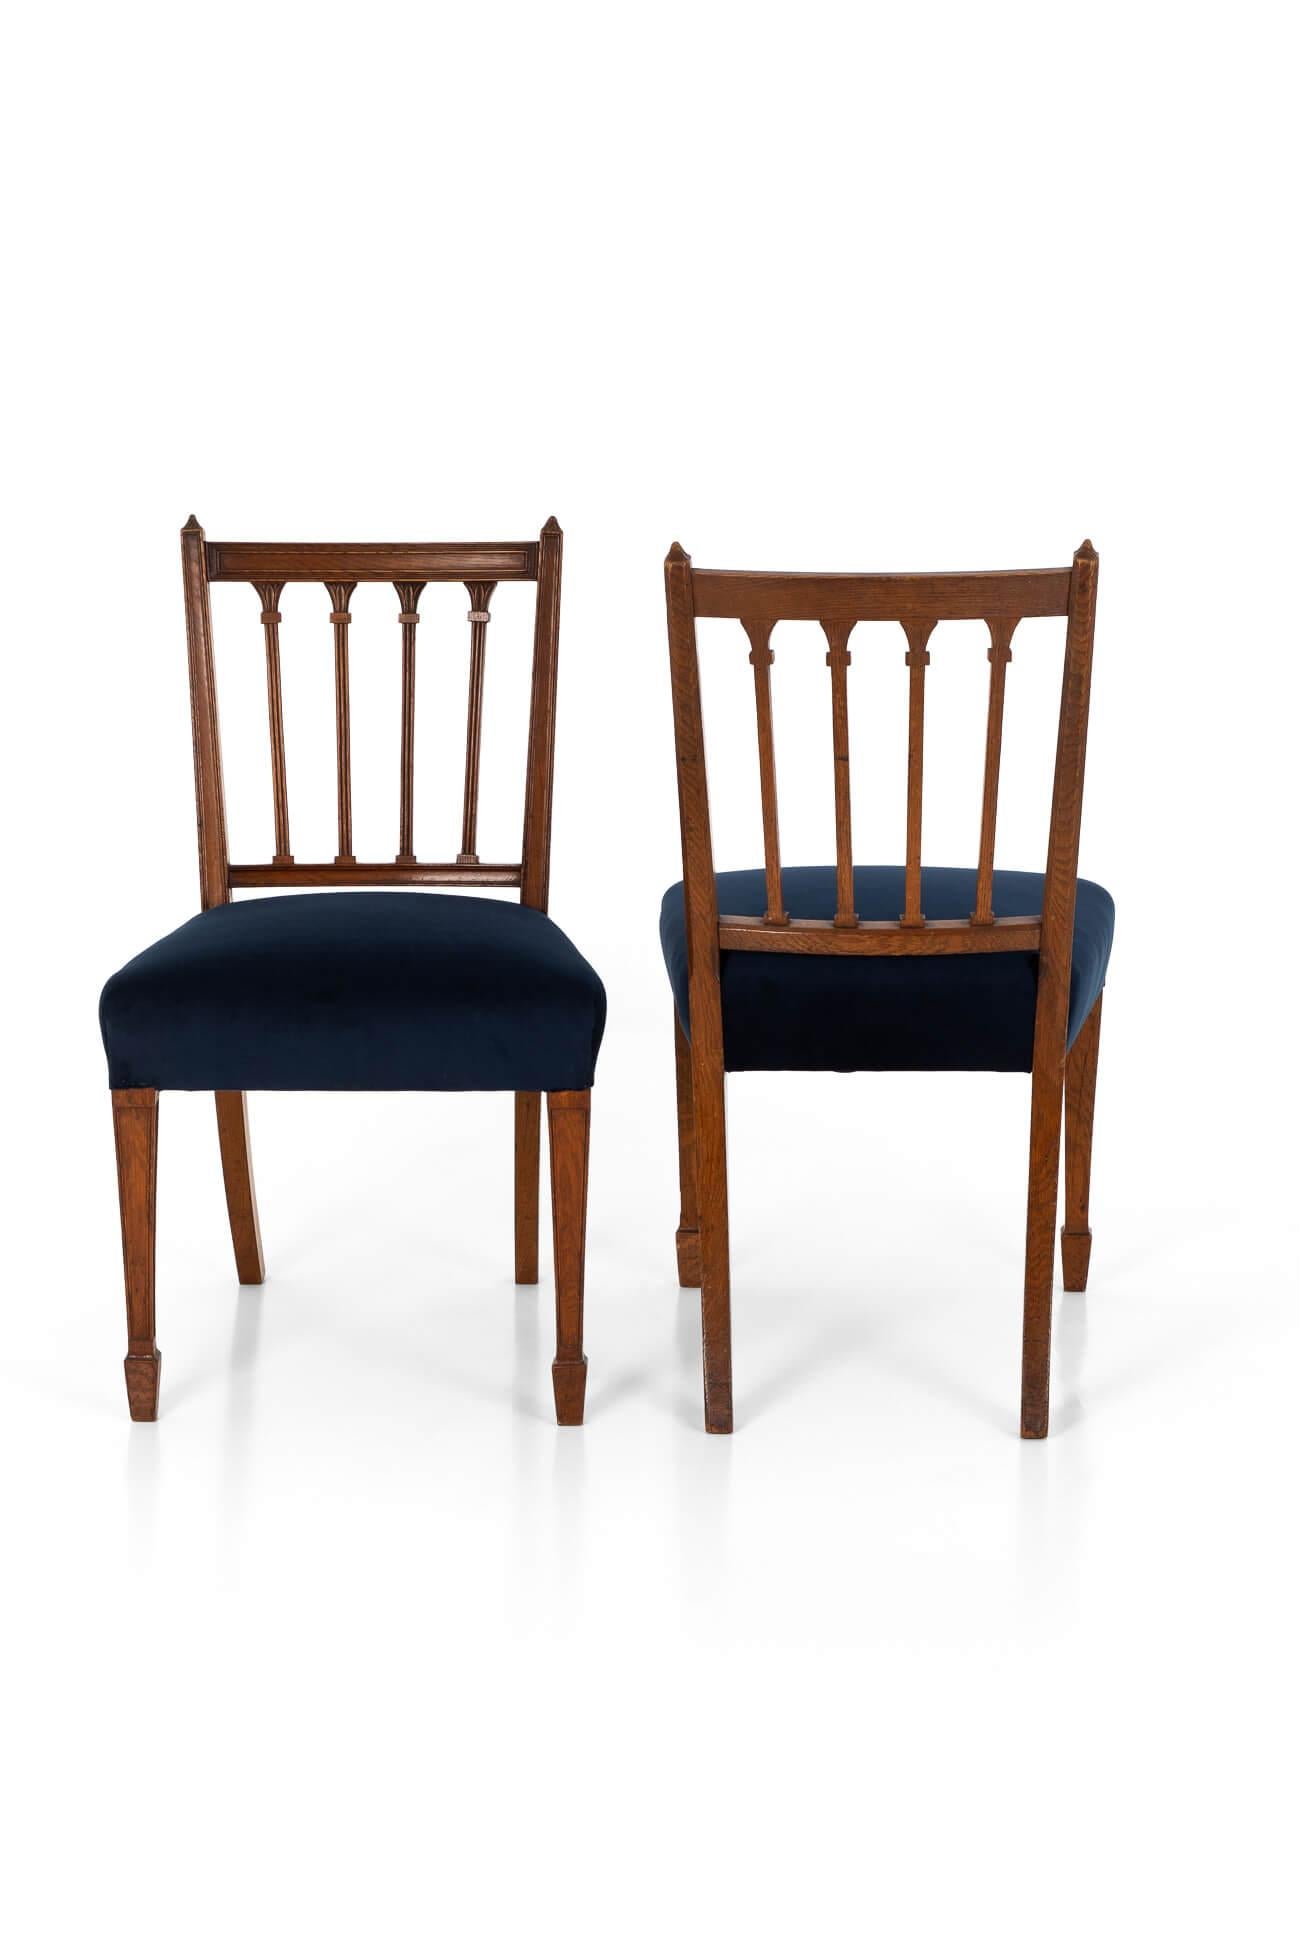 Aesthetic Movement James Shoolbread Occasional Chairs For Sale